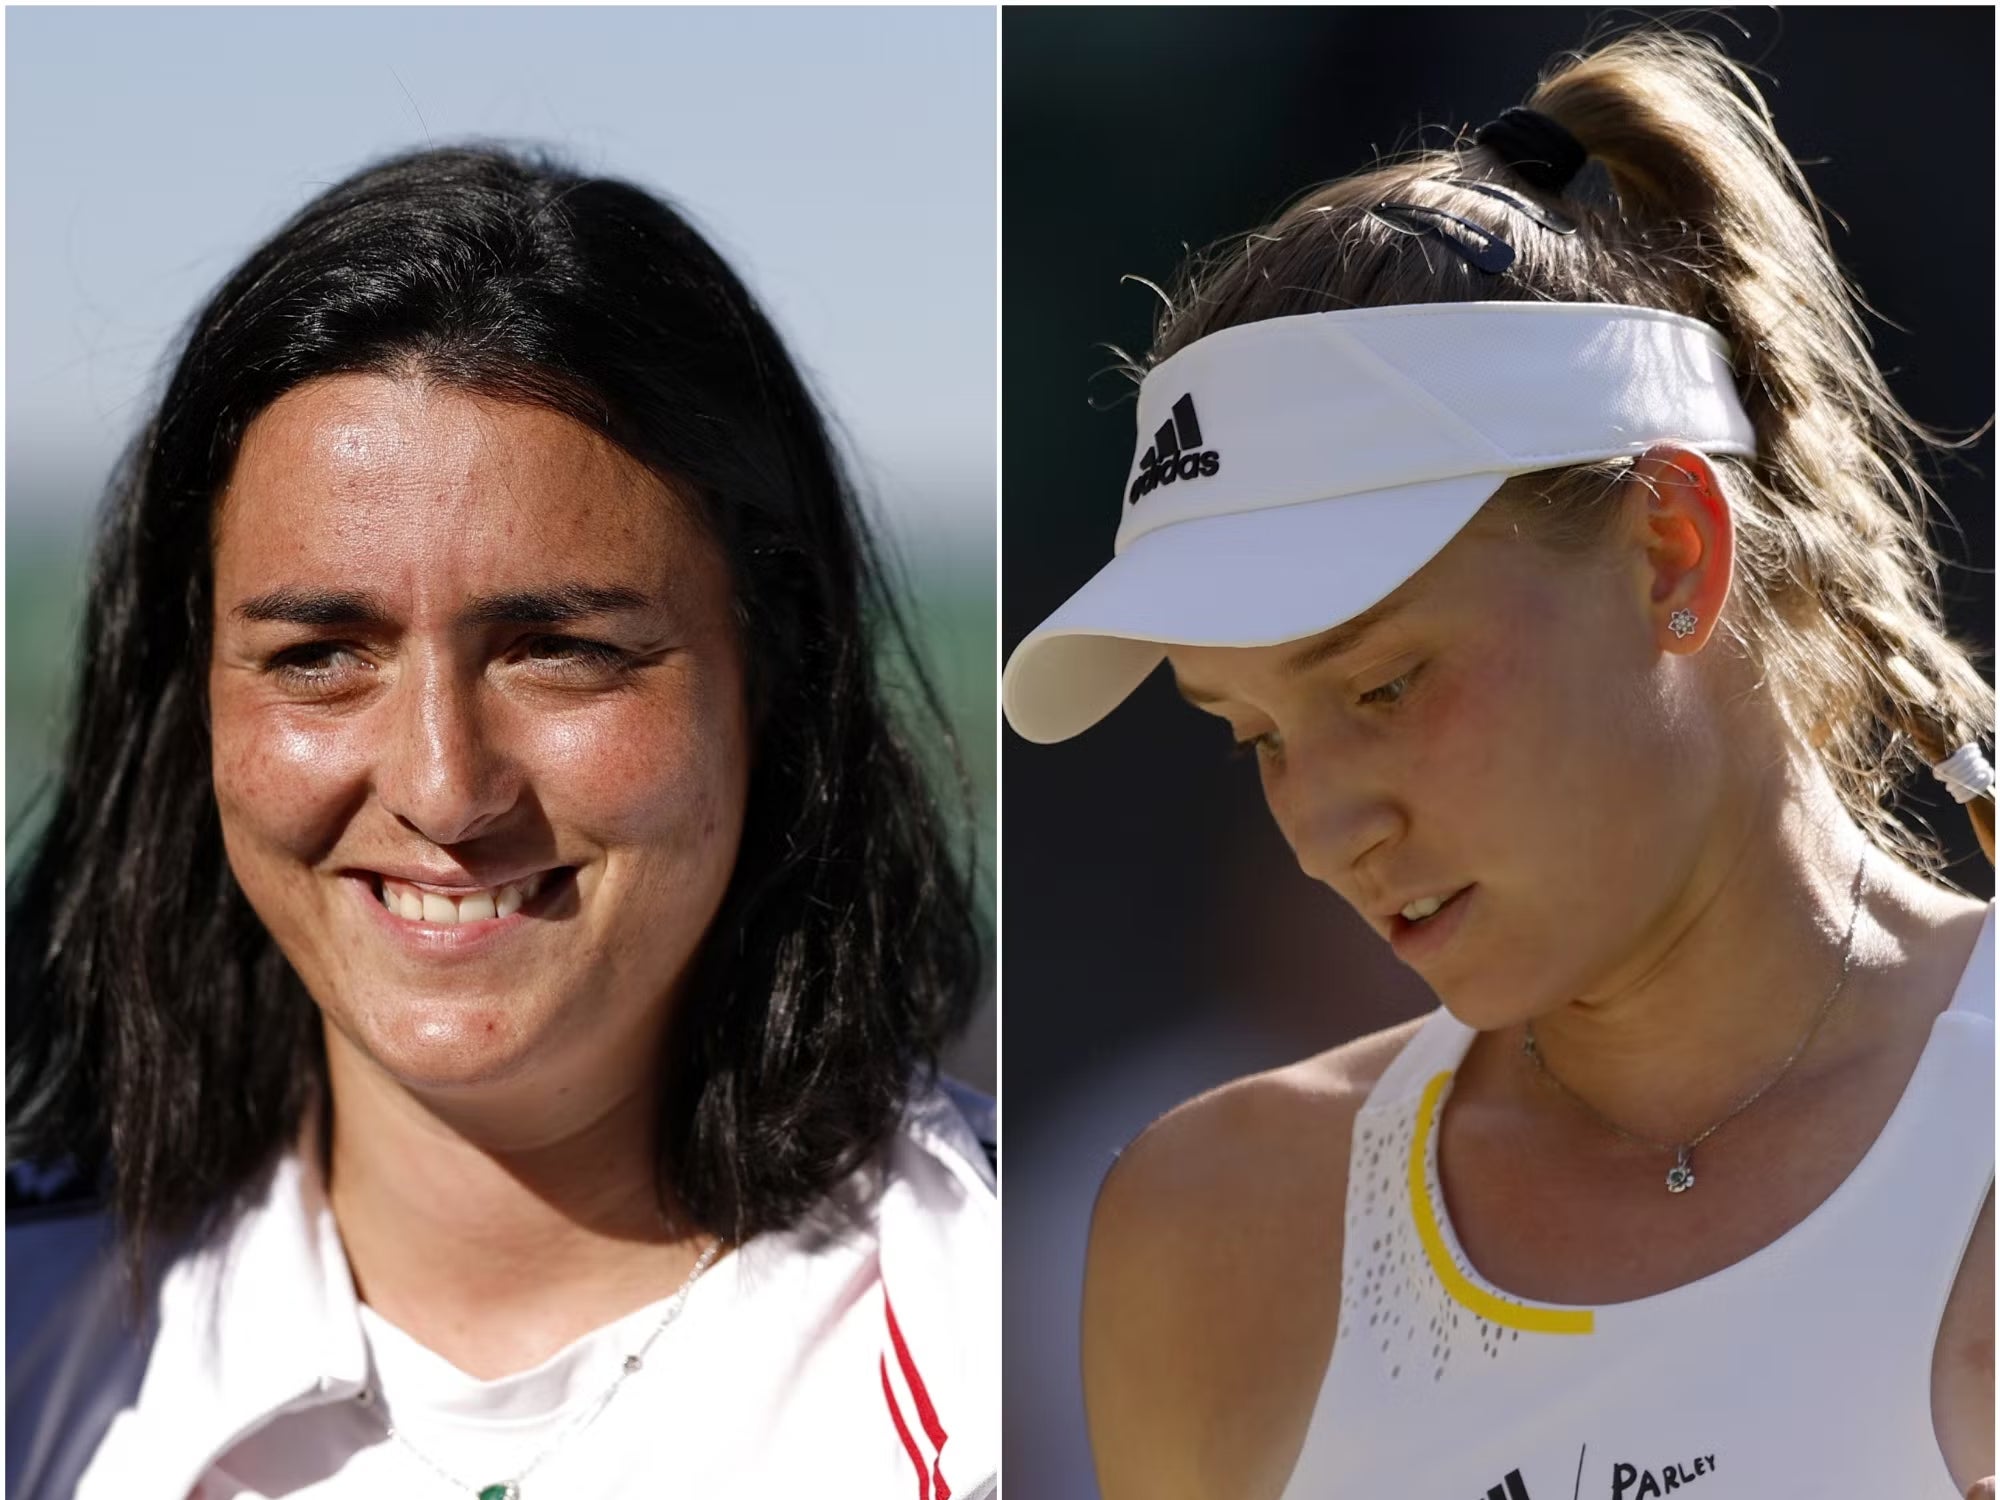 Ons Jabeur and Elena Rybakina will do battle on Saturday in the women’s final at Wimbledon (Steven Paston/PA)